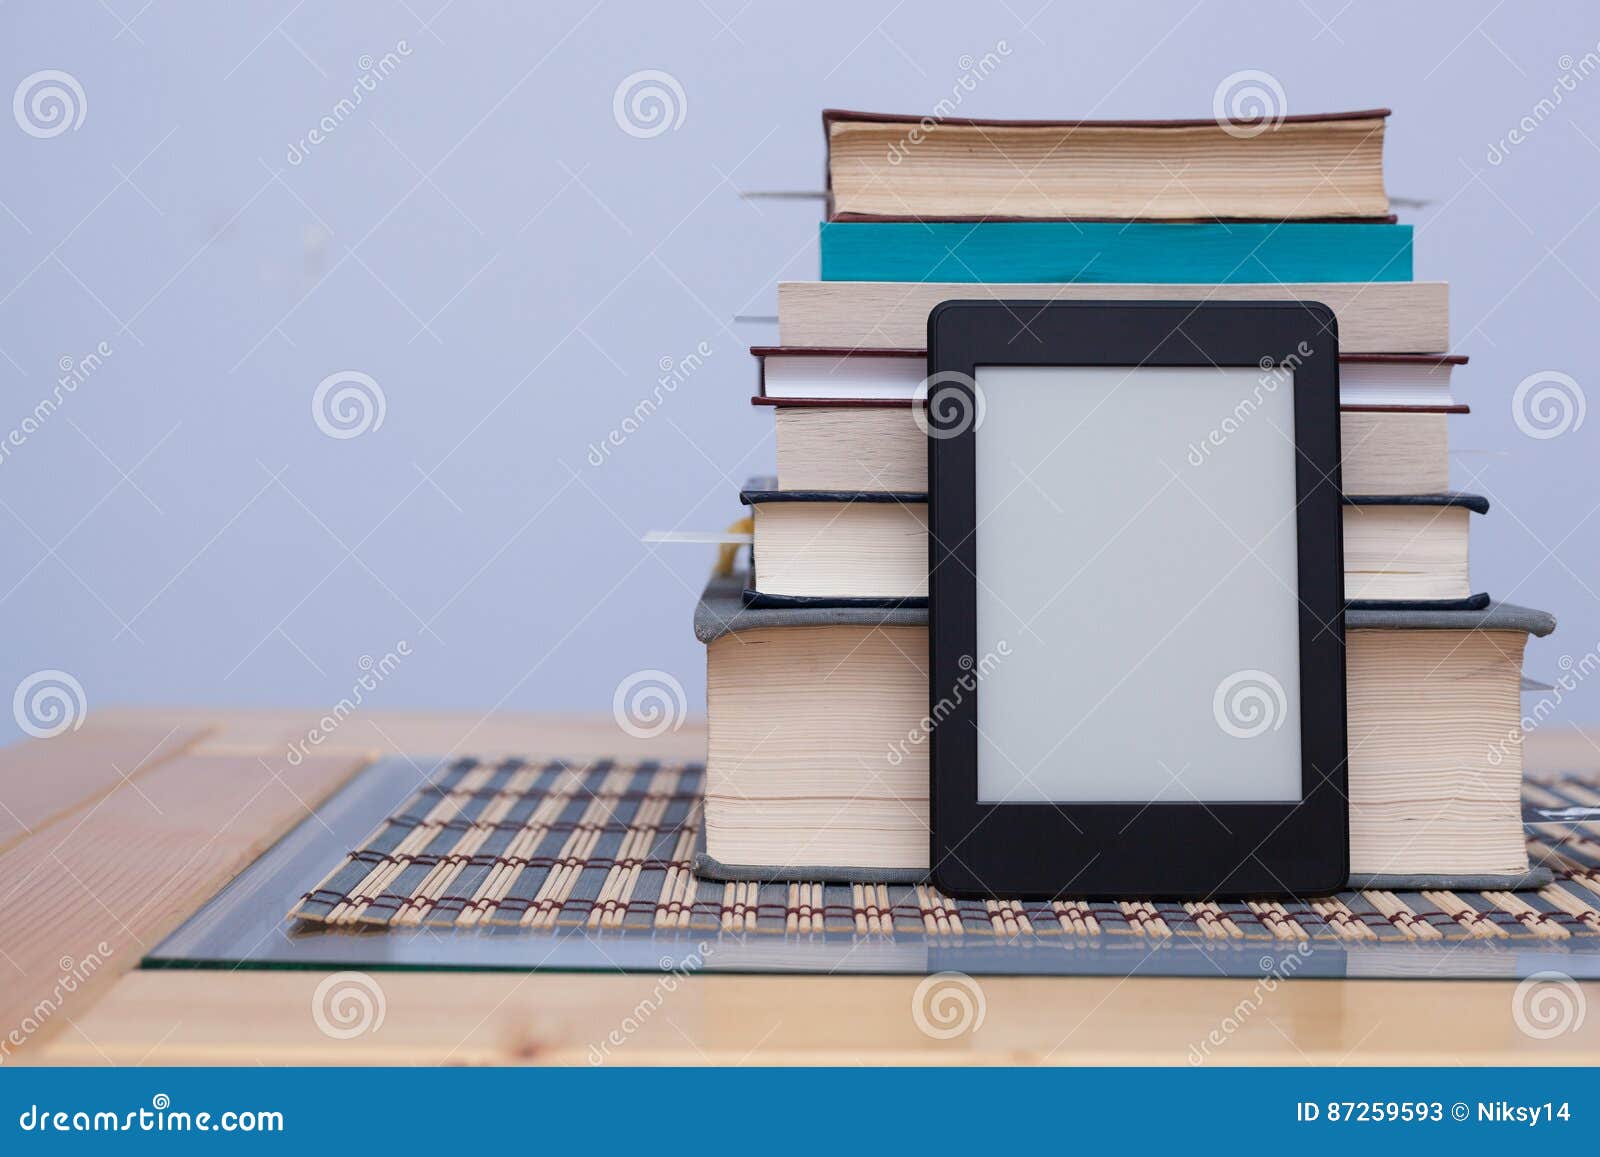 blank ereader in front of a tower of books with bookmarks